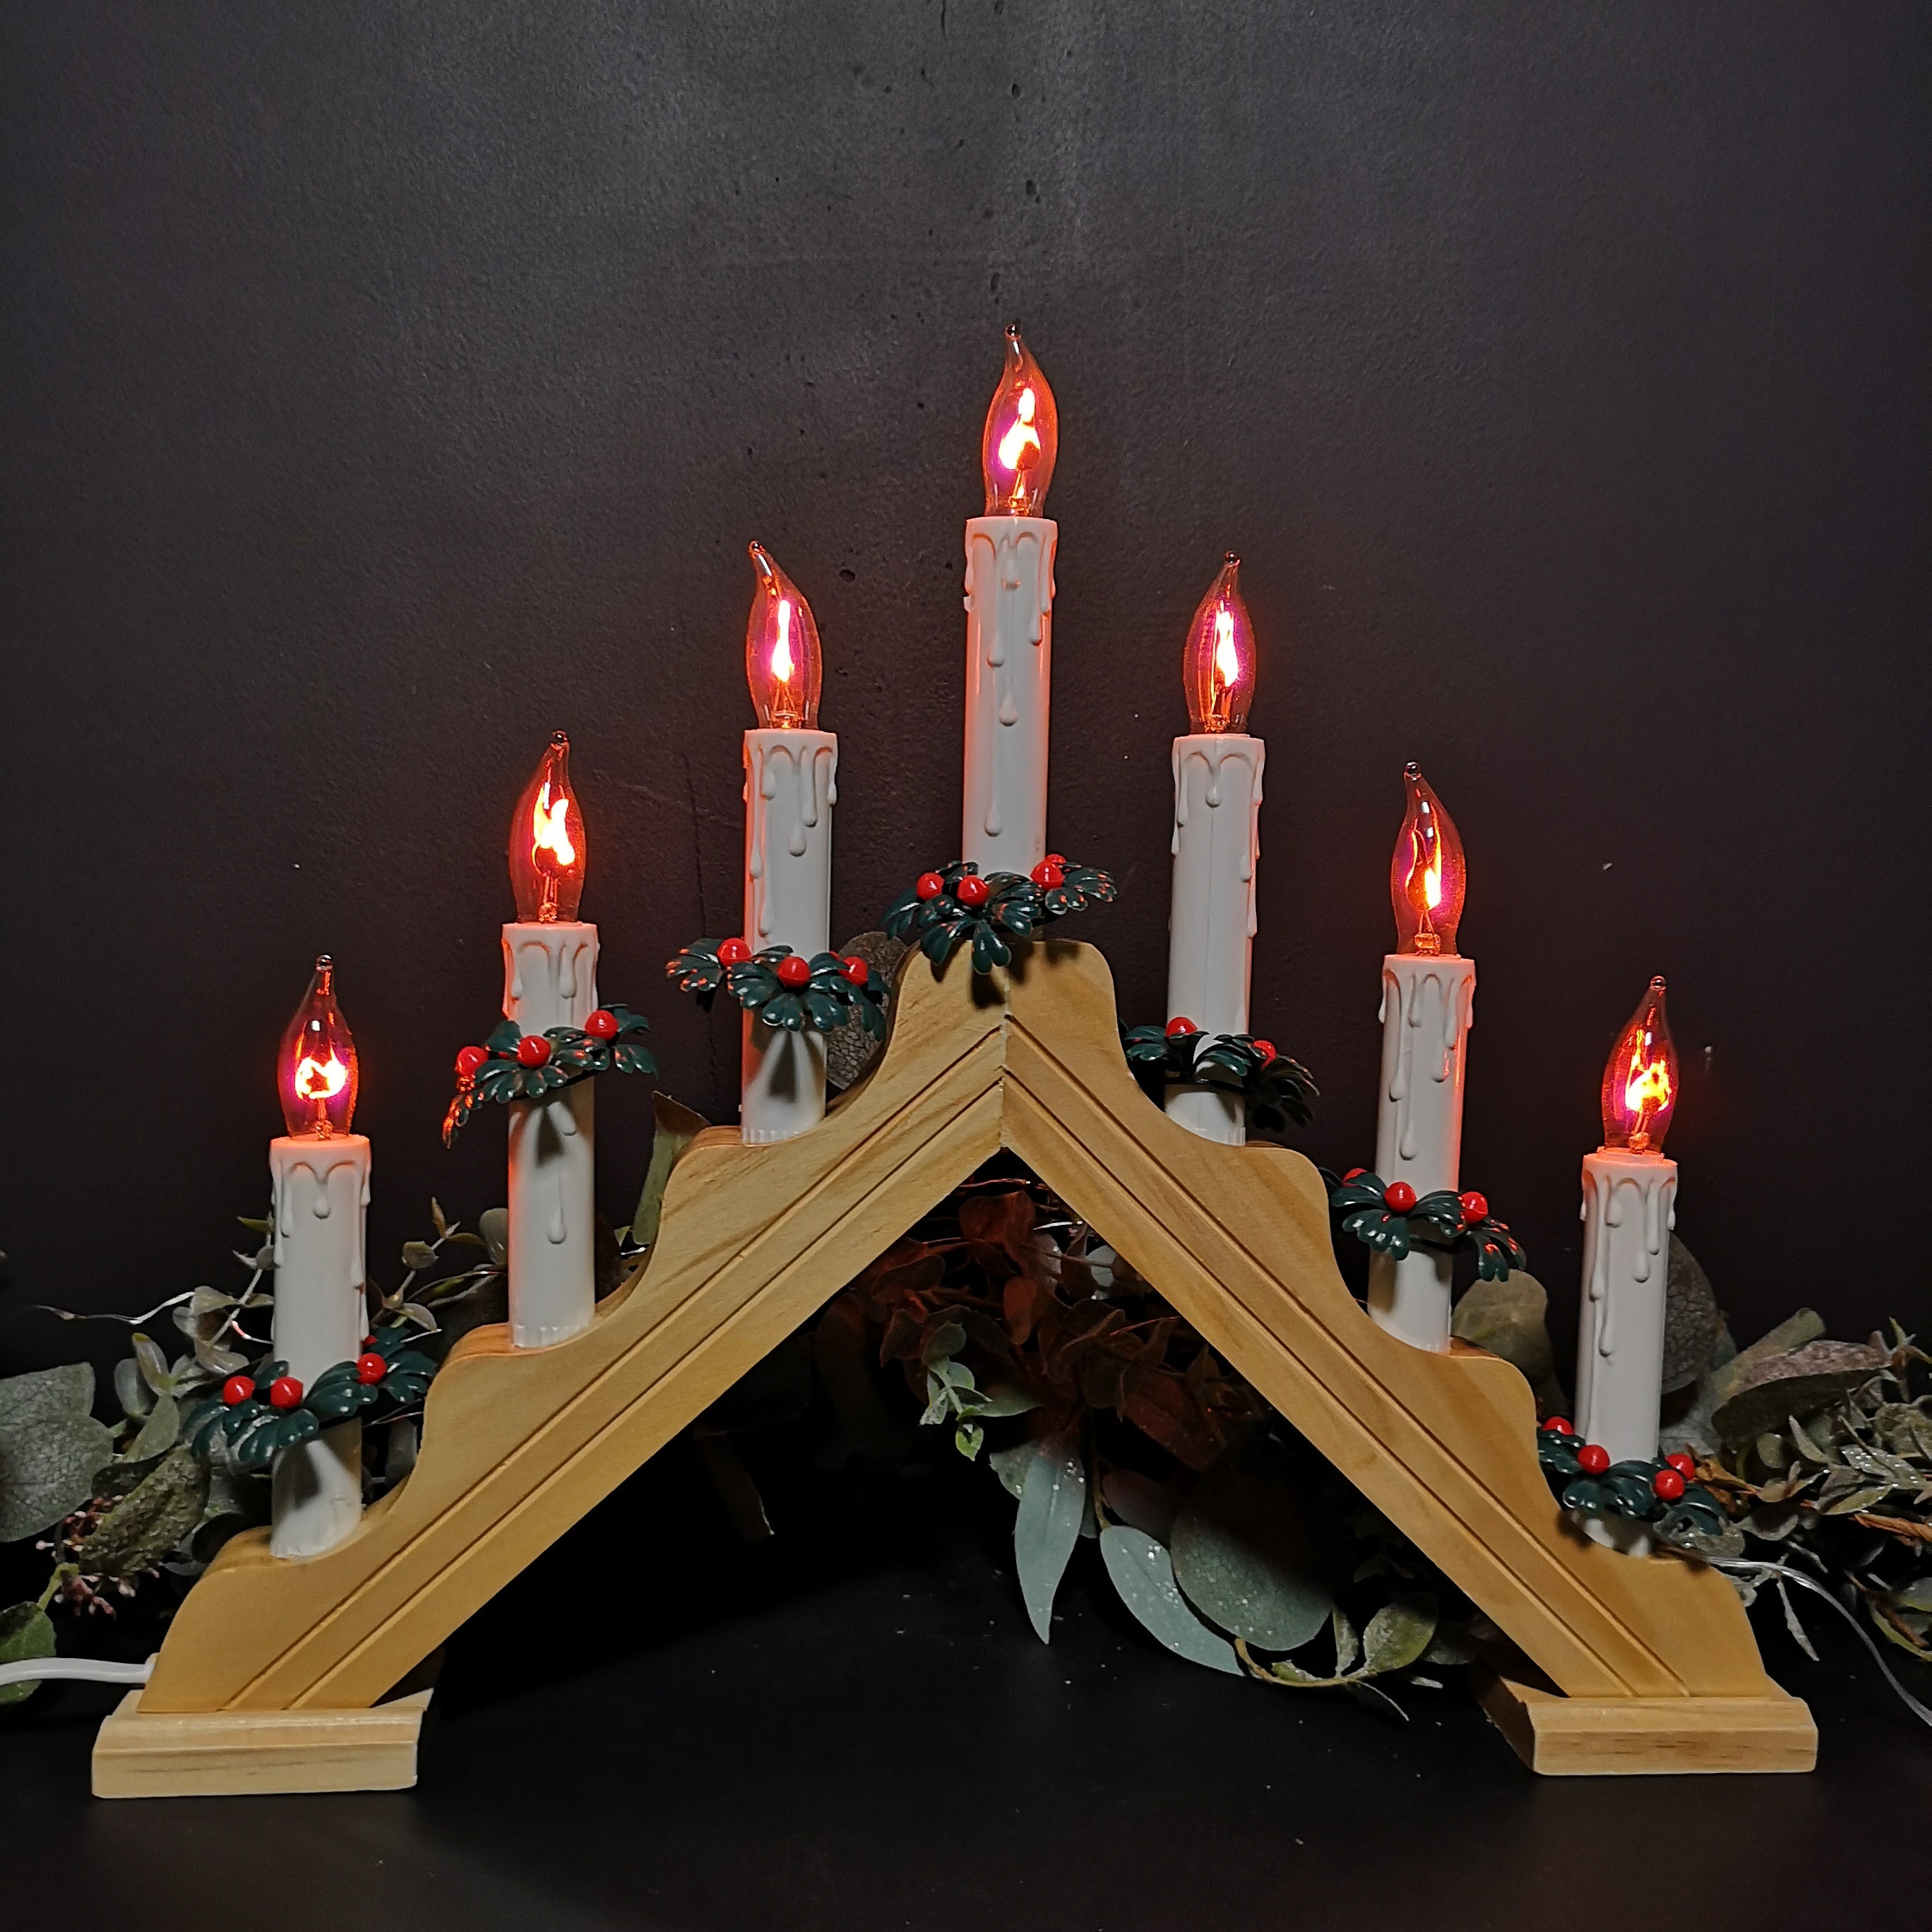 40cm Premier Christmas Candlebridge with 7 Flickering Bulb in Light Wood Finish Mains Operated